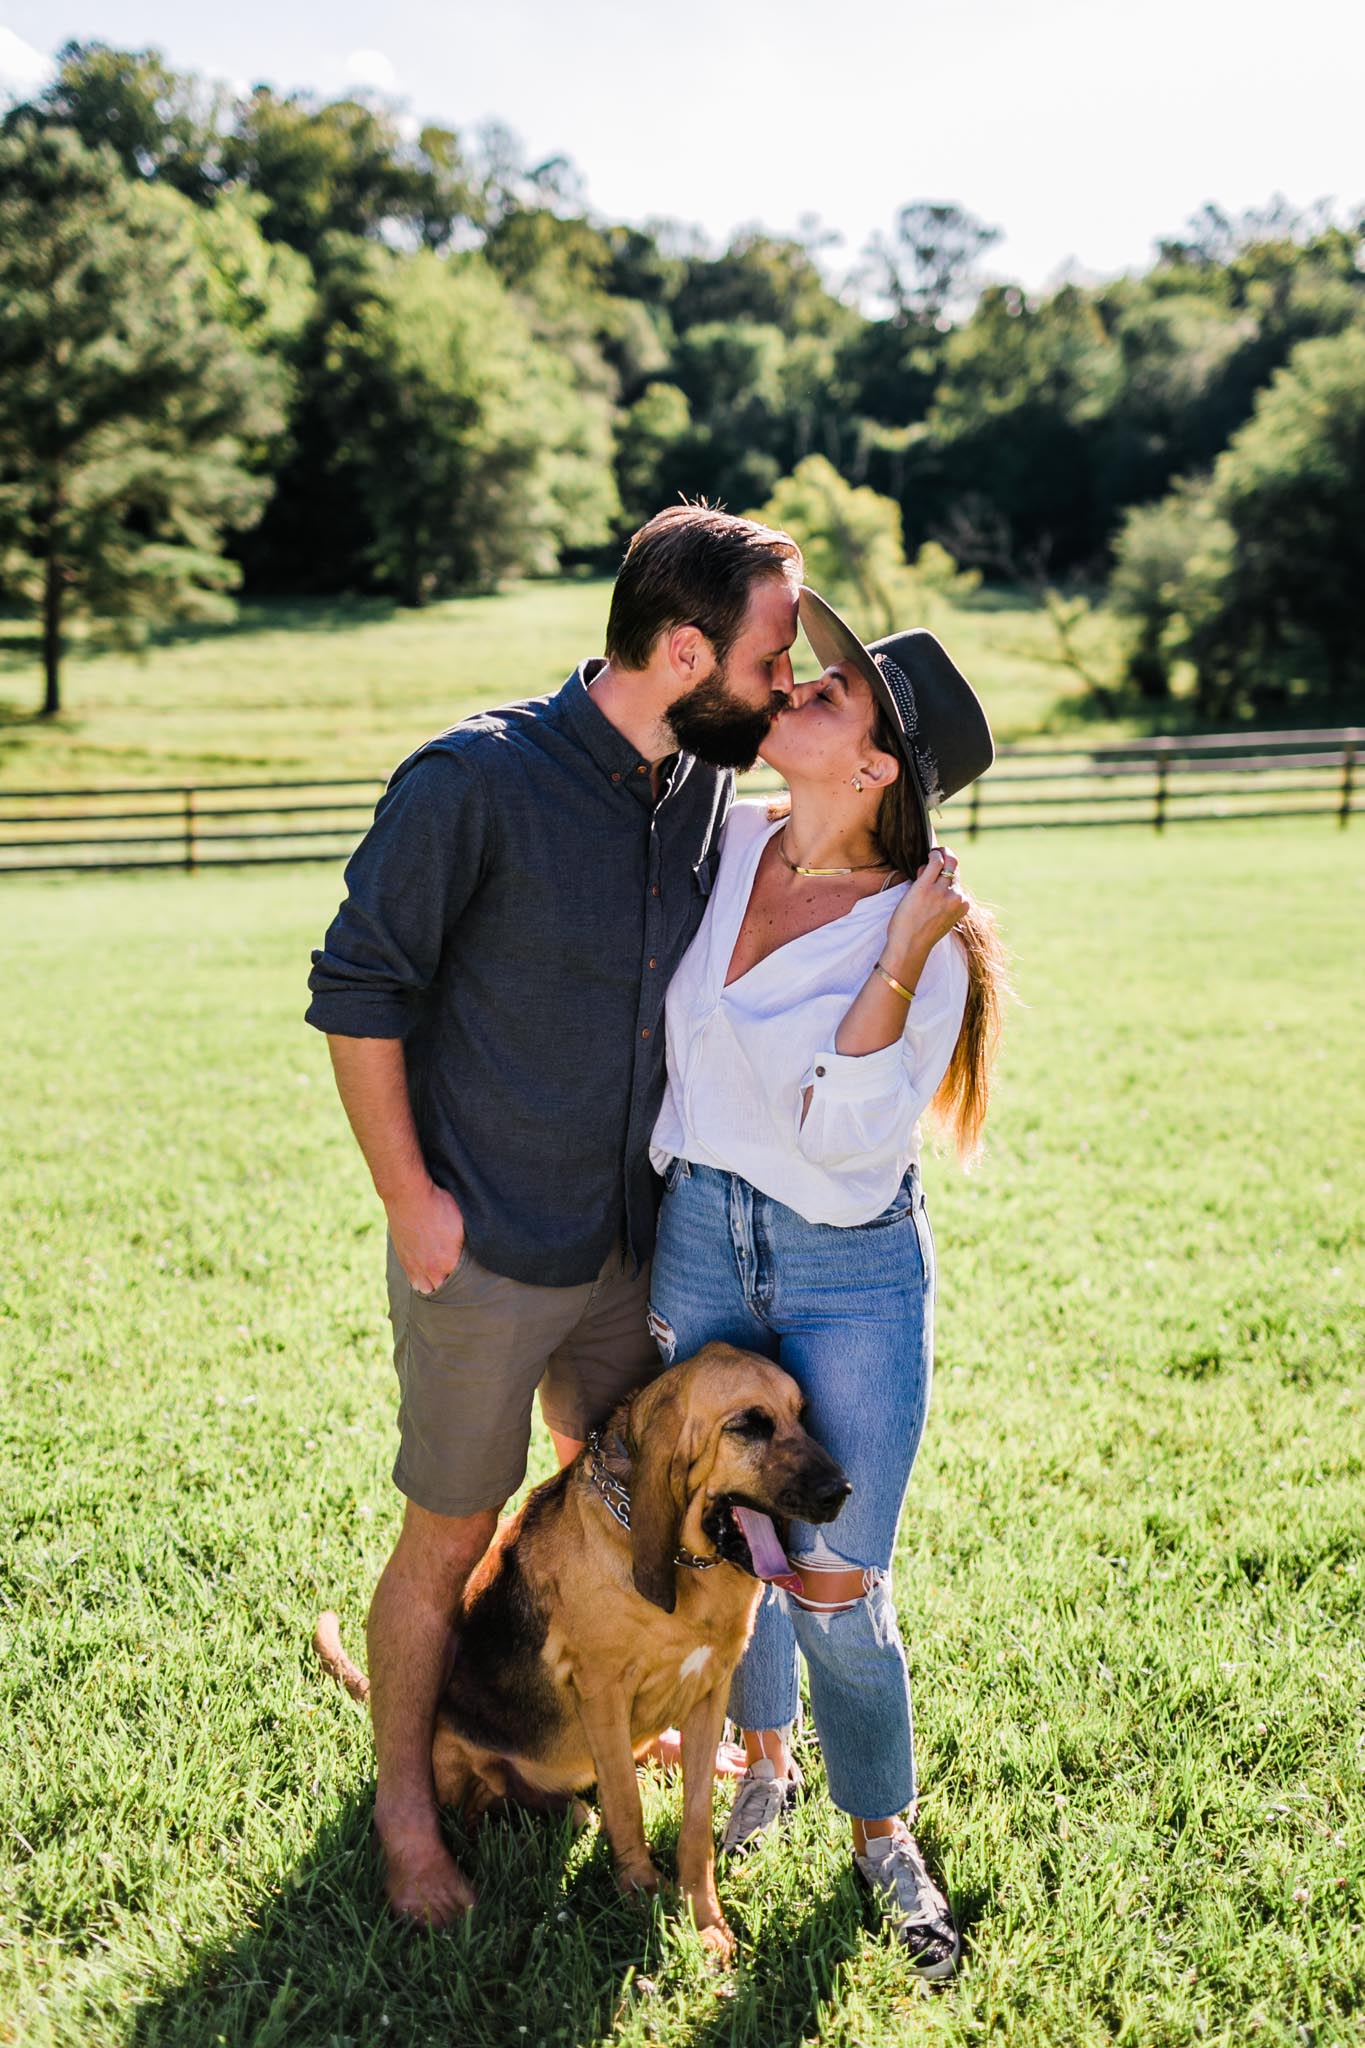 Durham Family Photographer | By G. Lin Photography | Couple kissing outdoors in open field